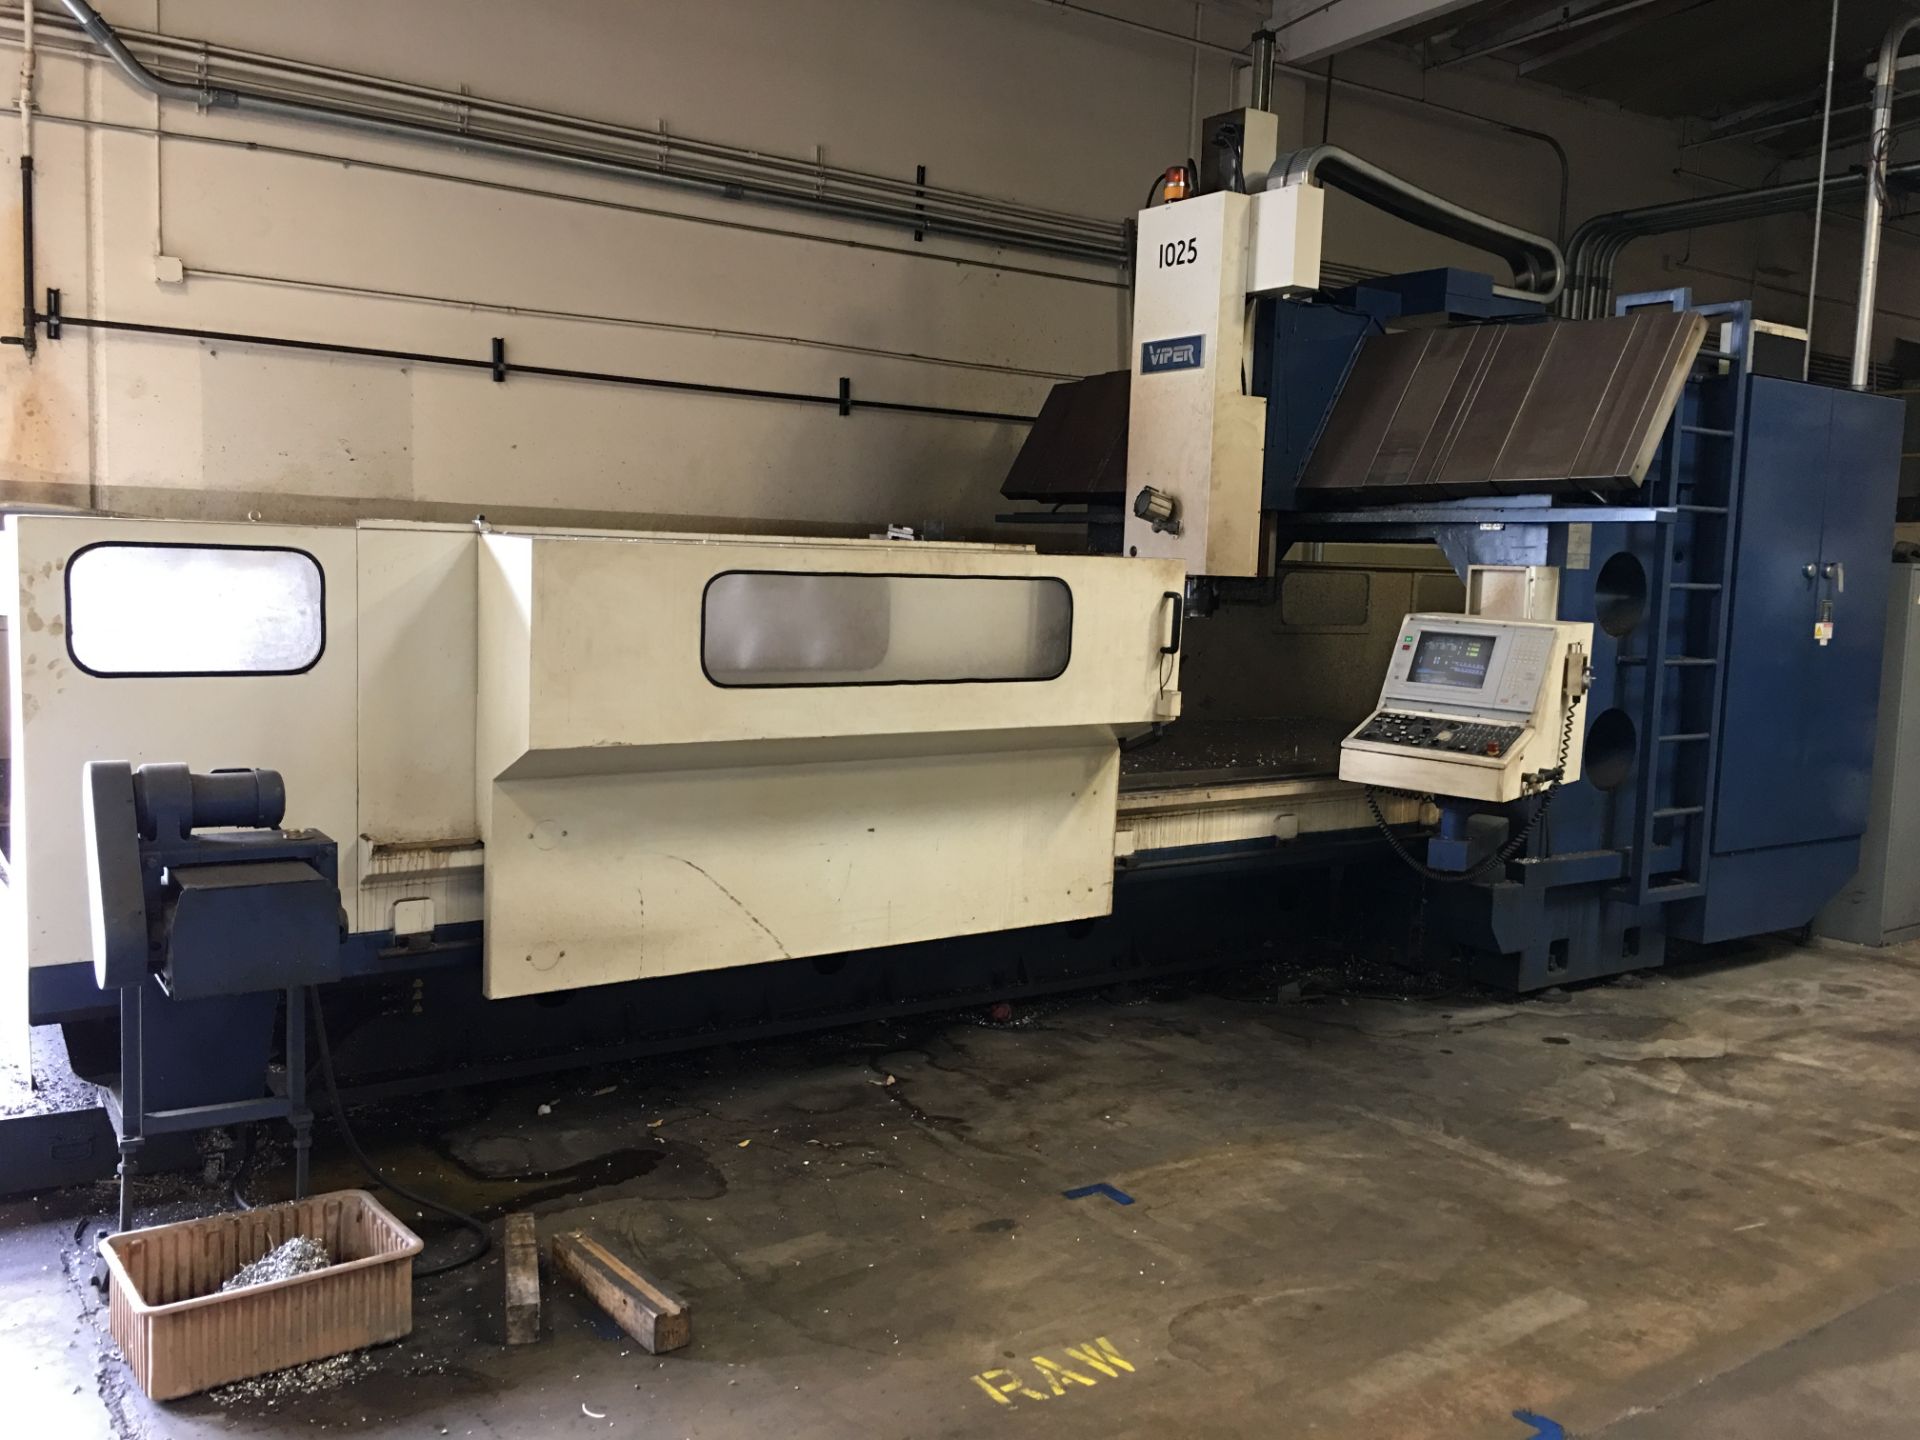 Viper HB-180 3-Axis Vertical Bridge Mill. Gantry Type, Single Spindle, Approximately 180” X 48”